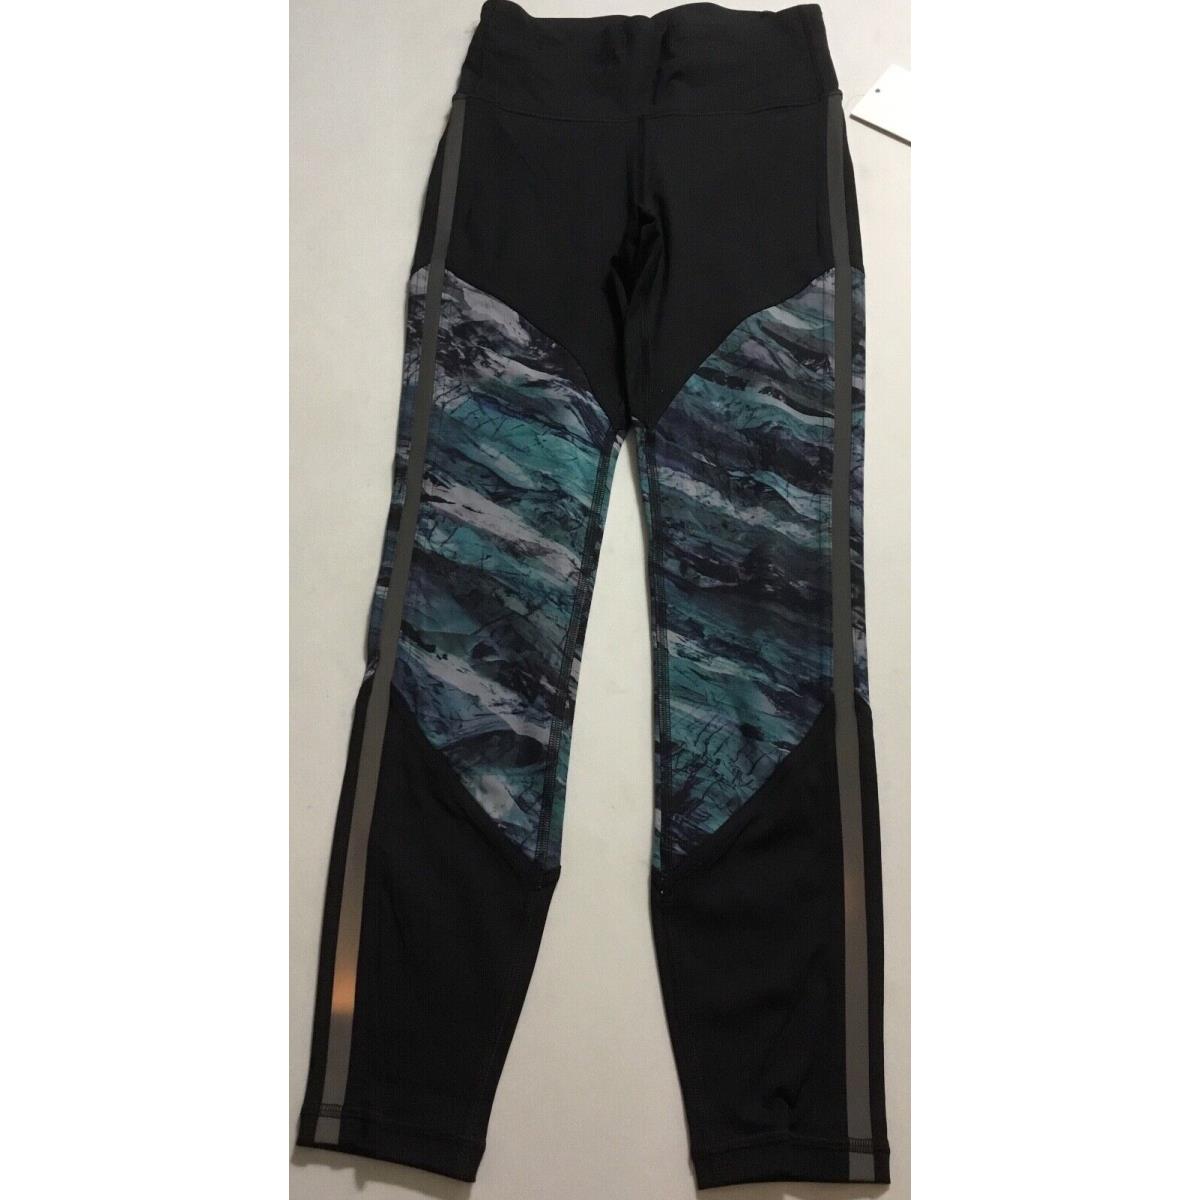 Lululemon Women s Run to Reset Tight 25 Nulux LW5BWQS Blk/fism Size 8